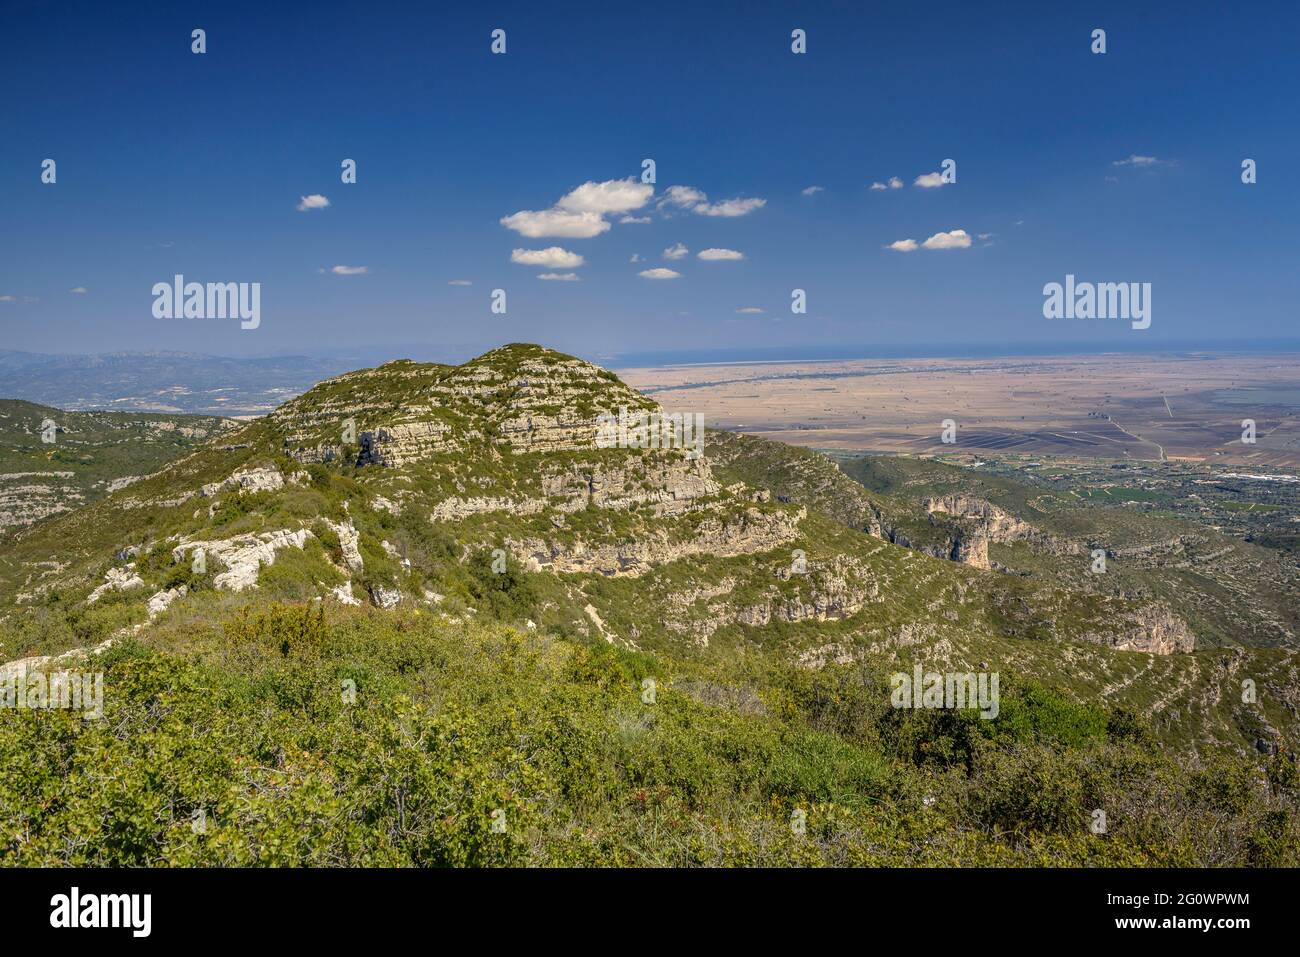 Views from the crest of the Serra de Montsià range looking towards the mountain and, in the background, the Ebro delta (Tarragona, Catalonia, Spain) Stock Photo